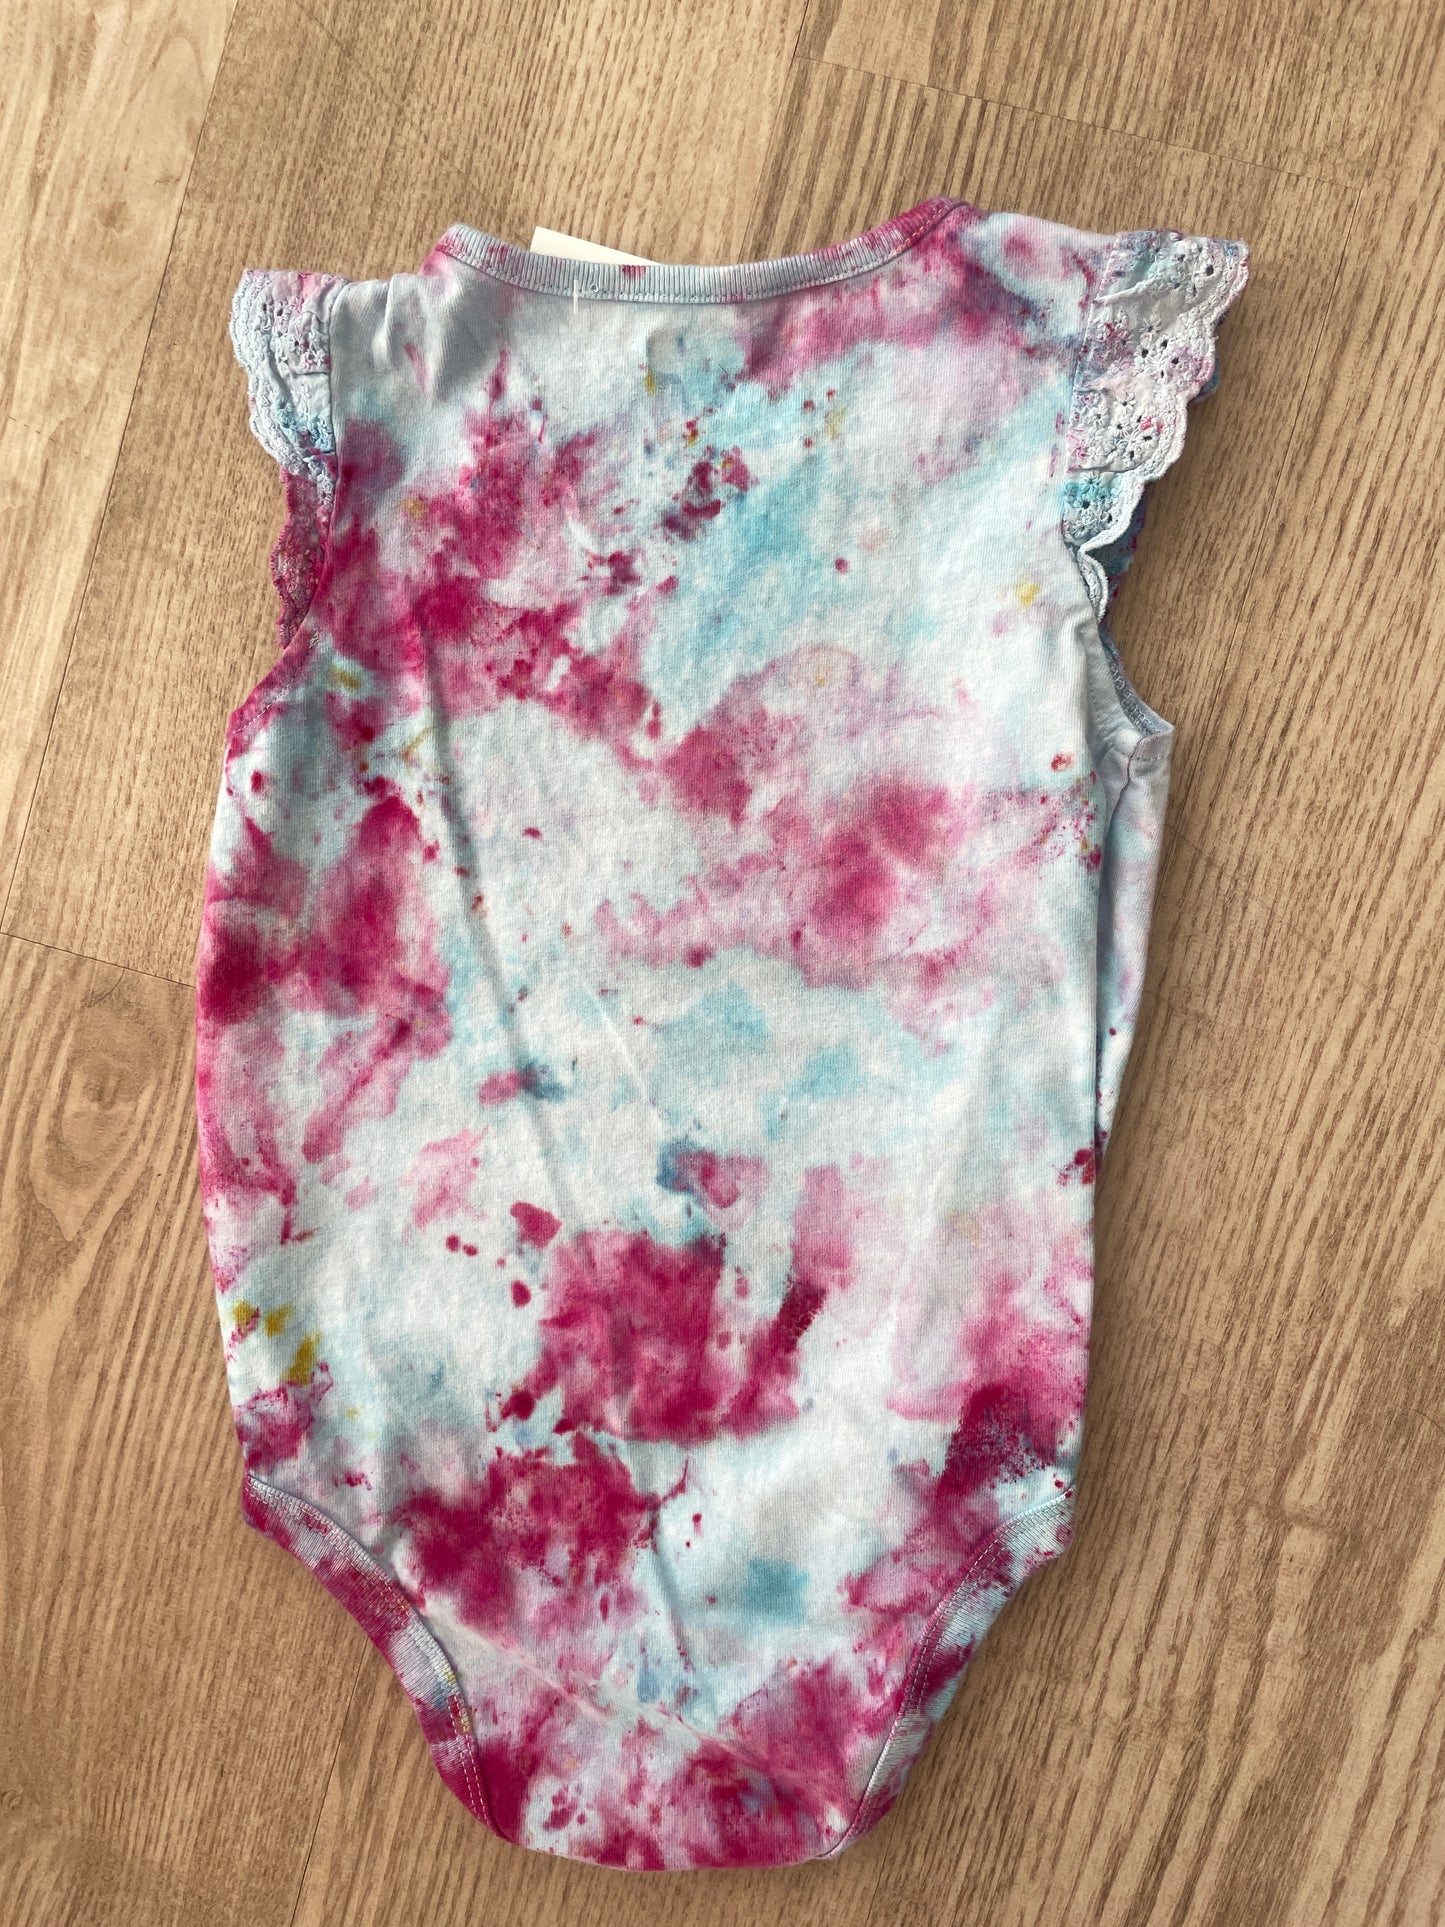 24 Months Just So Cute Short Sleeve Baby Onesie | Handmade, Upcycled Tie Dye Cotton Onesie | Galaxy Ice Dyed Blue and Pink Baby Clothing